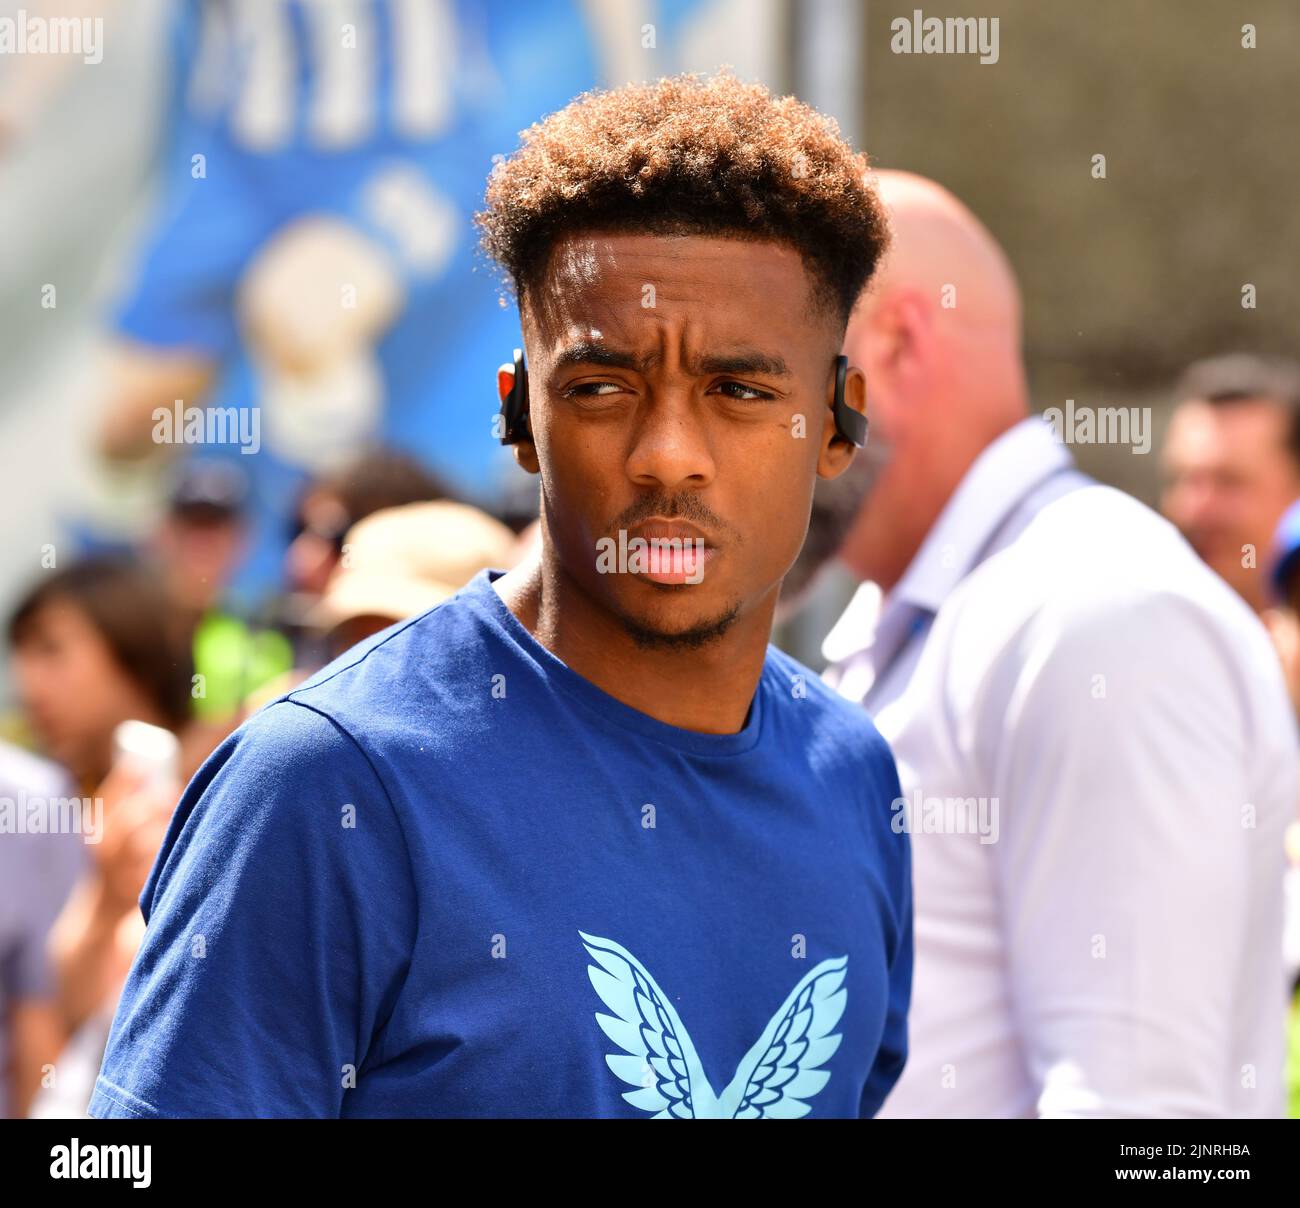 Brighton, UK. 13th Aug, 2022. Joe Willock of Newcastle United arrives for the Premier League match between Brighton & Hove Albion and Newcastle United at The Amex on August 13th 2022 in Brighton, England. (Photo by Jeff Mood/phcimages.com) Credit: PHC Images/Alamy Live News Stock Photo